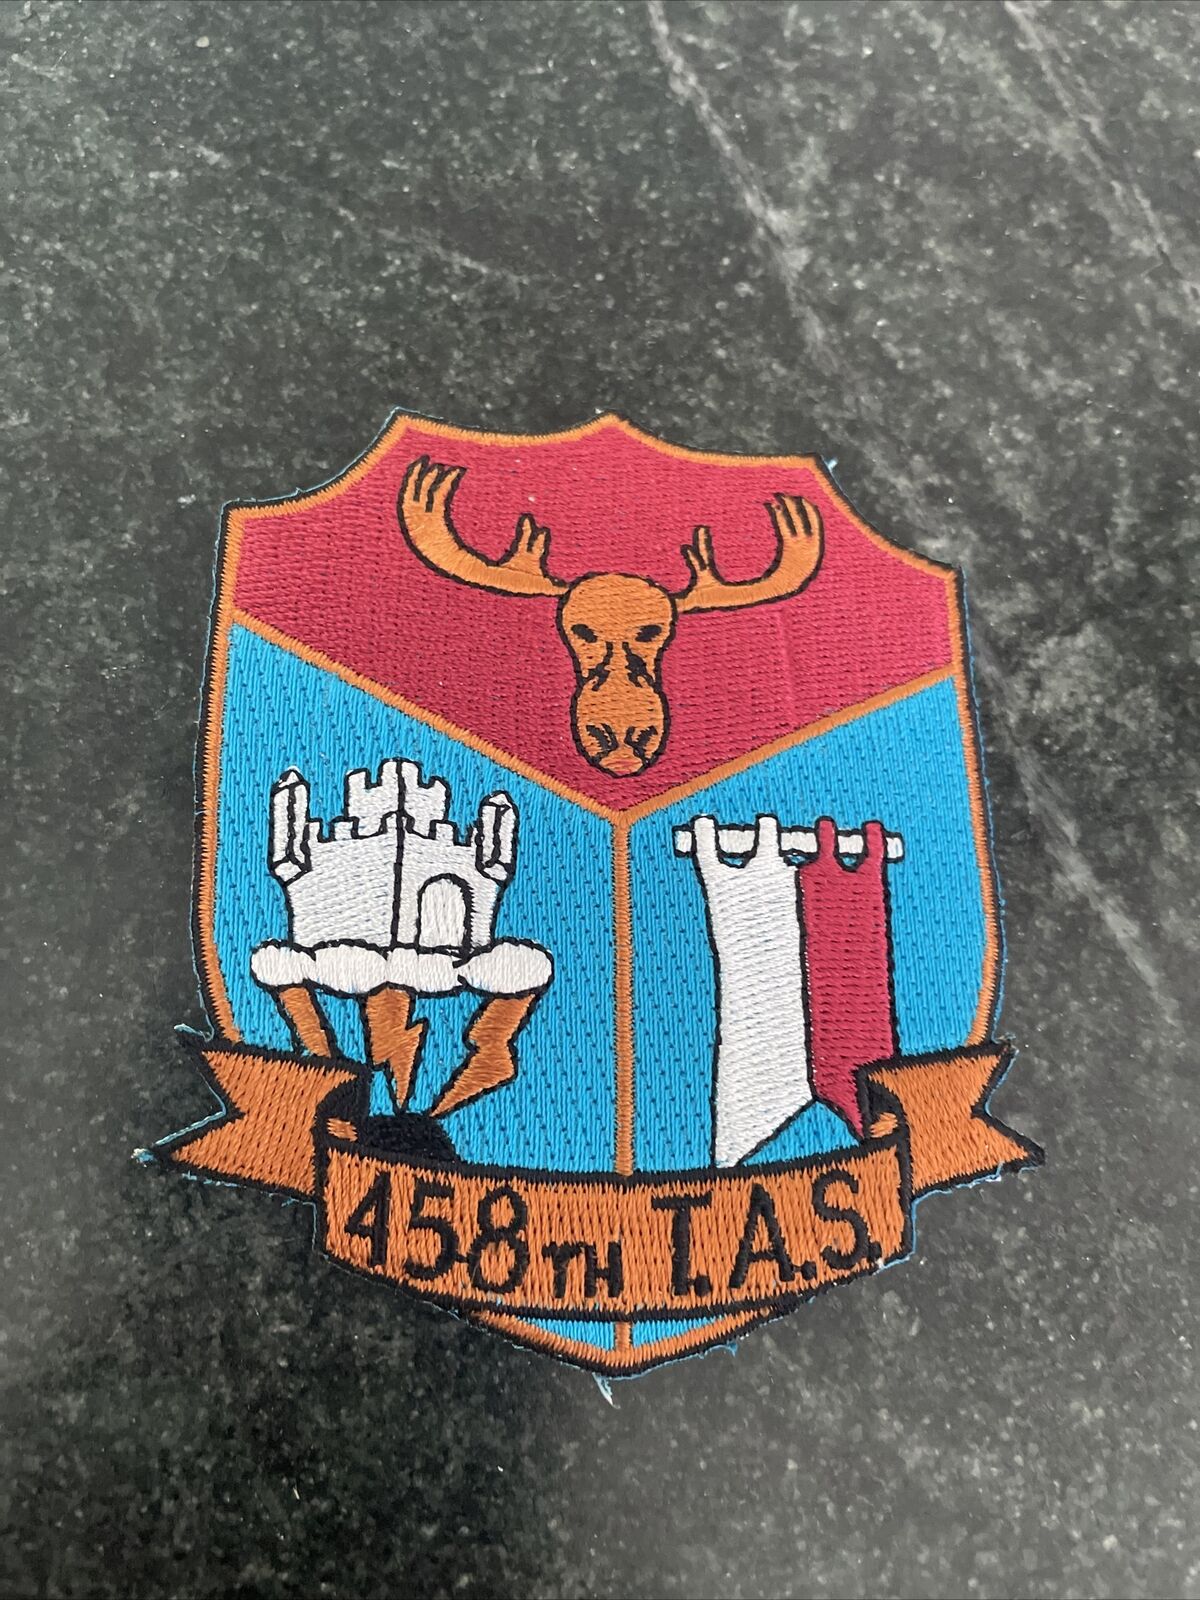 458th TAS Tactical Airlift Squadron Iron On Patch Castle Moose Logo Rare USAF